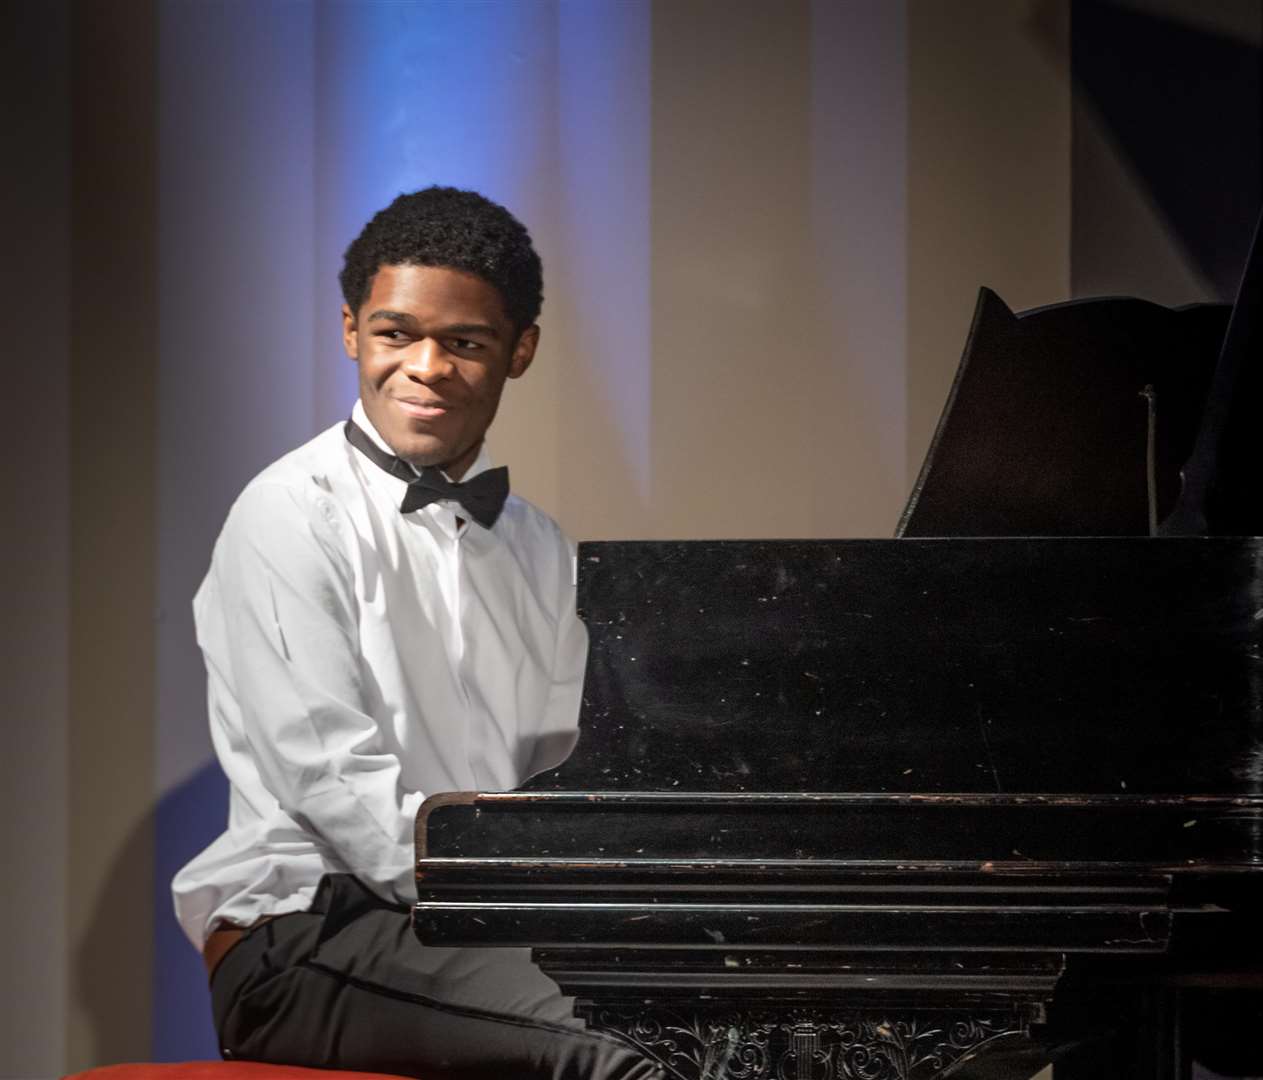 Pianist Justin Myles, 17 gave a talented performance of McGregor's Lowside Blues